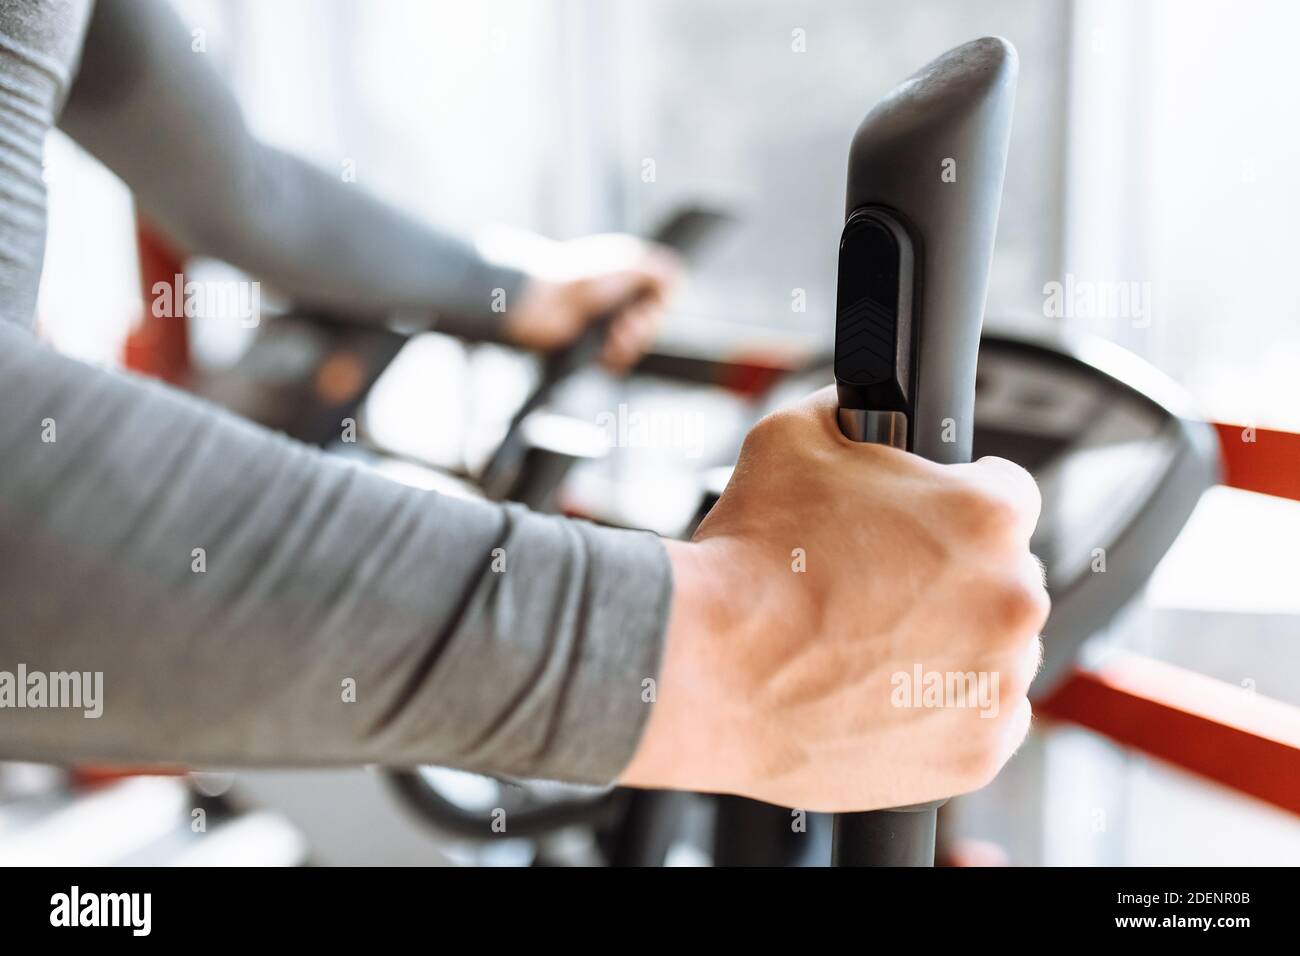 Training on a sports bike in the gym, hand close-up holding the handle of the bike, man Stock Photo